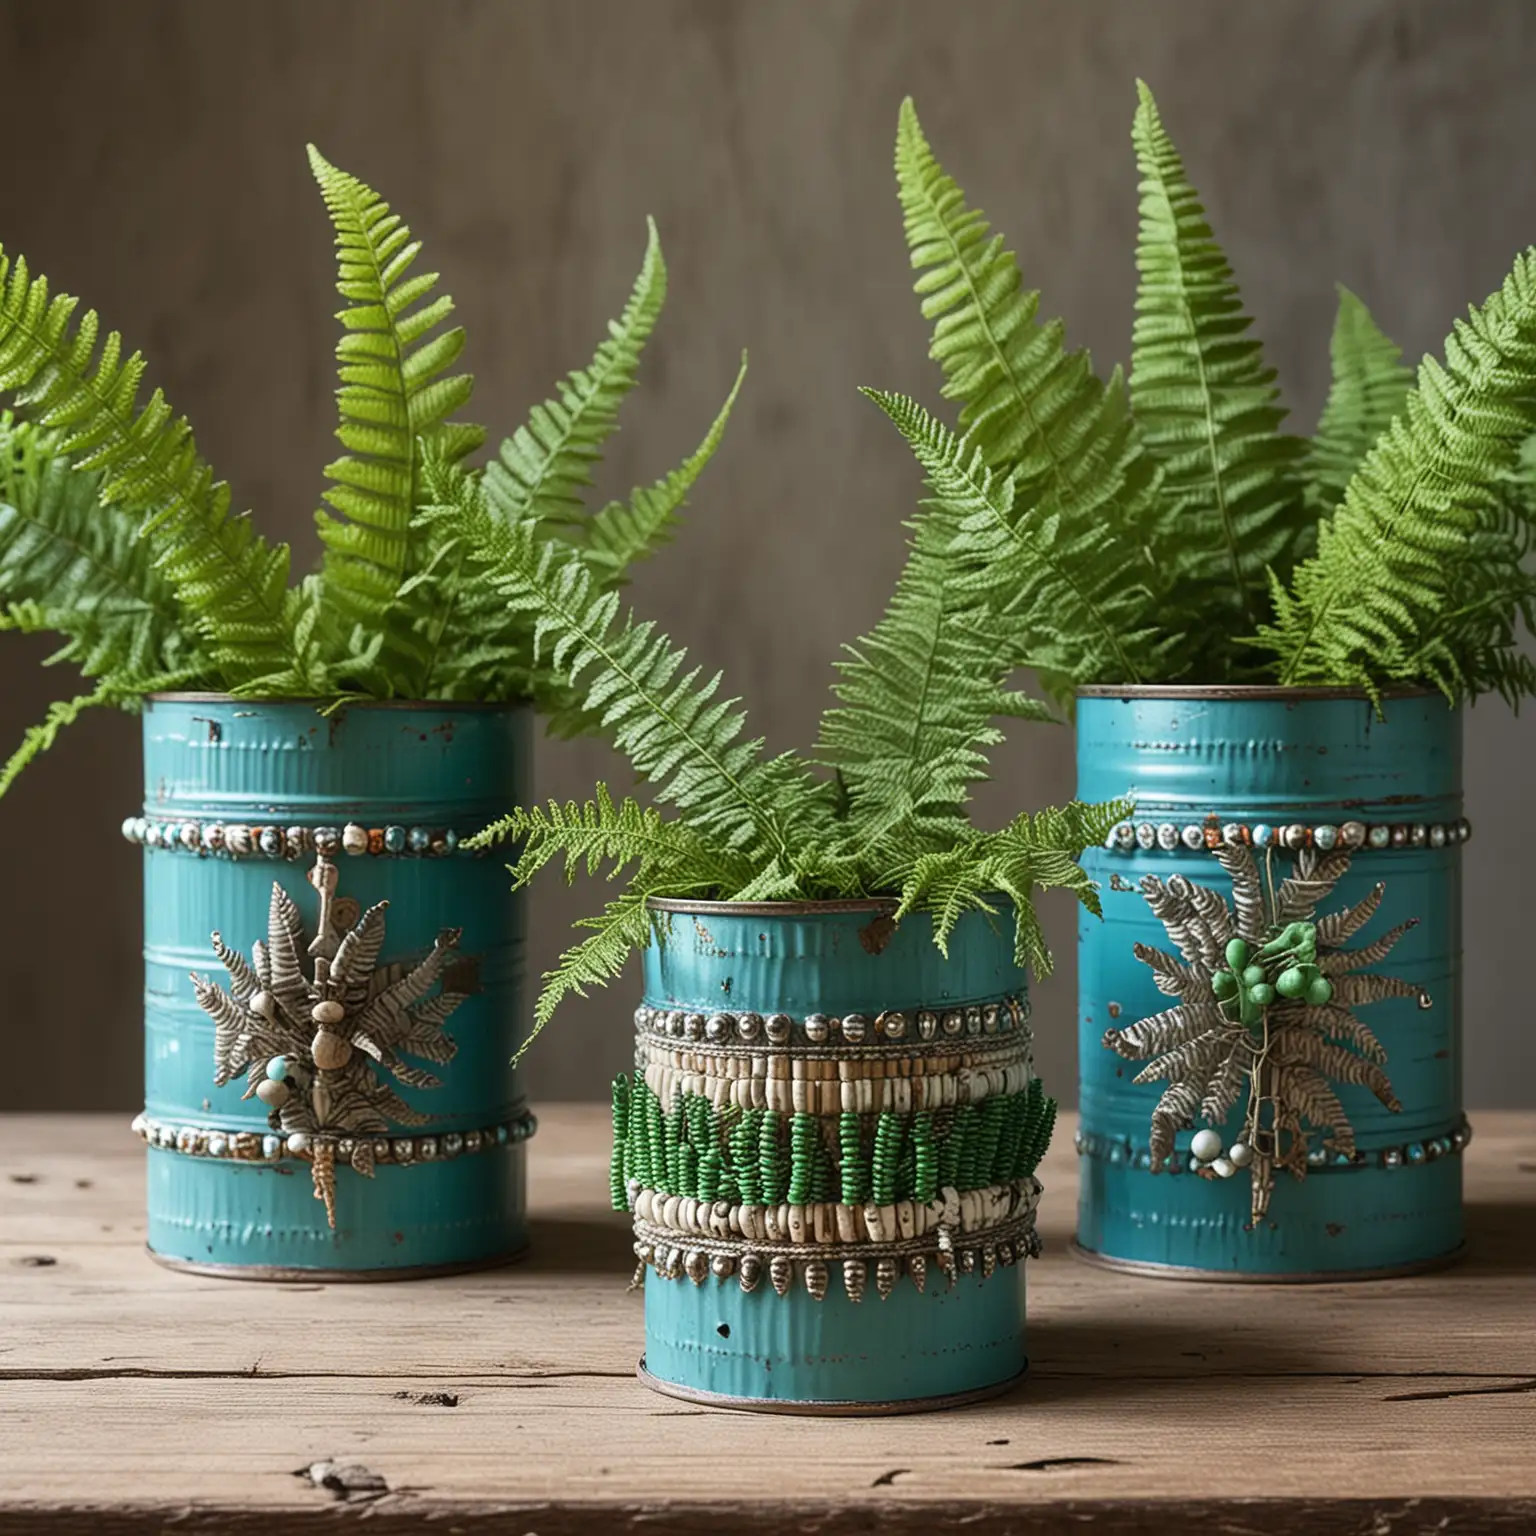 boho bold turquoise tin can vases decorated with boho bead accents holding green ferns; keep background neutral